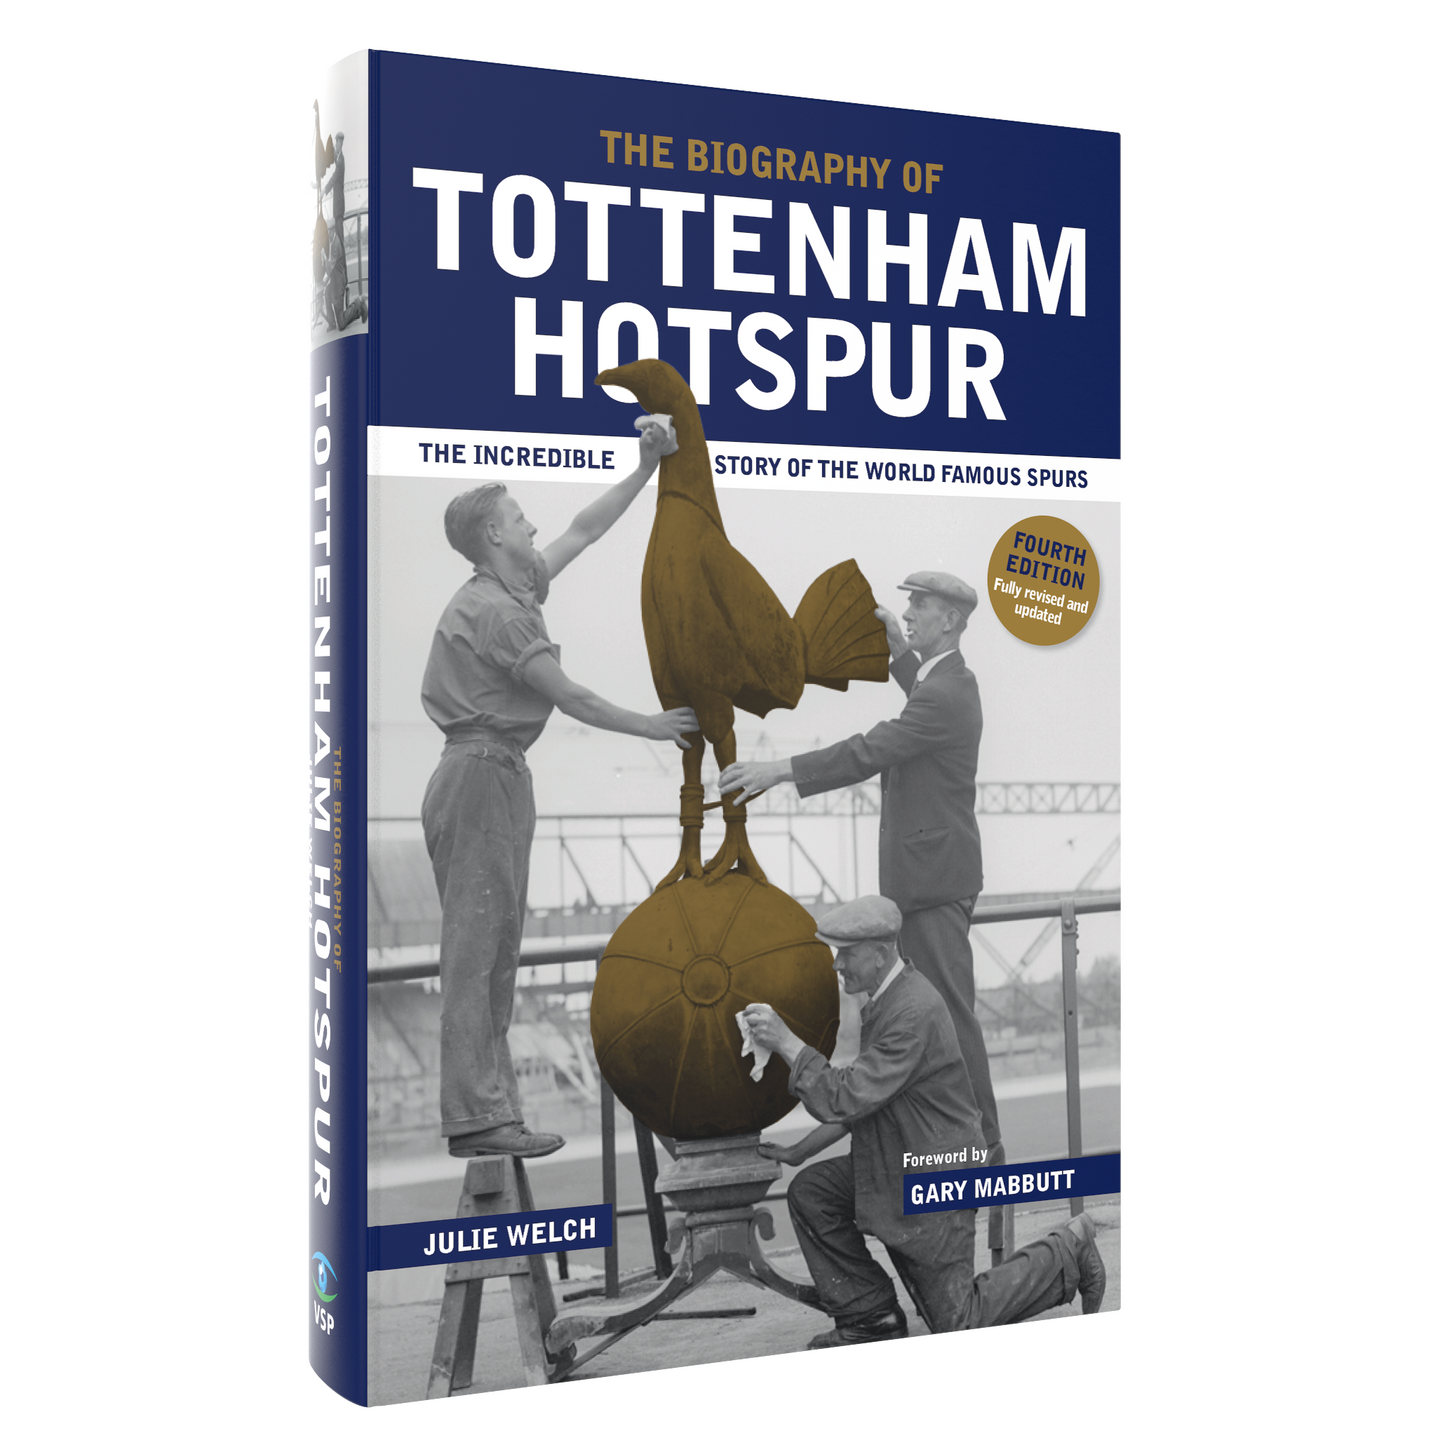 The Biography of Tottenham Hotspur - Signed by Julie Welch